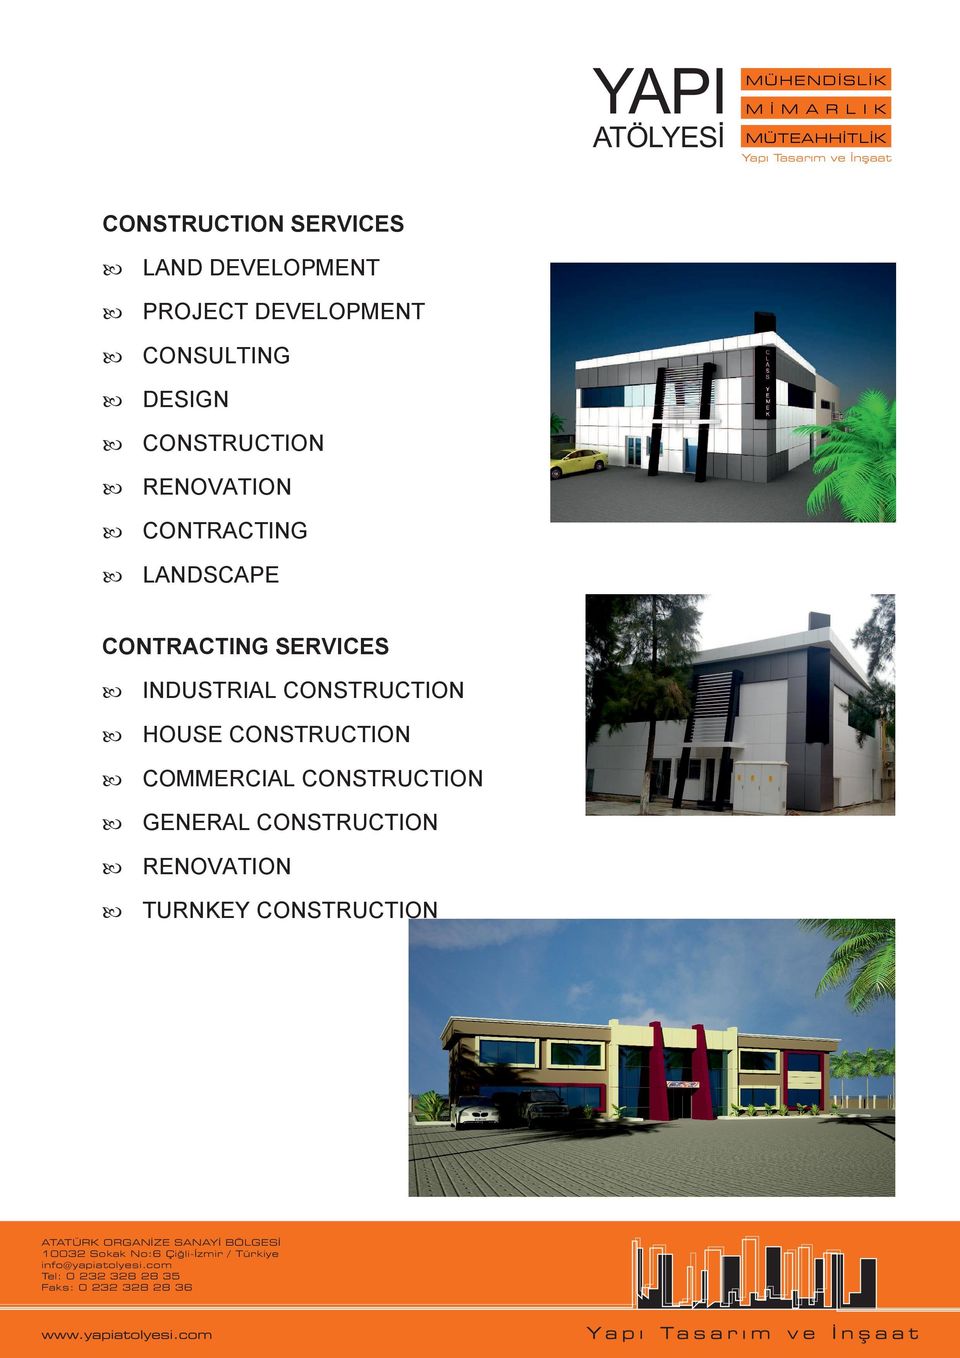 CONTRACTING SERVICES INDUSTRIAL CONSTRUCTION HOUSE CONSTRUCTION